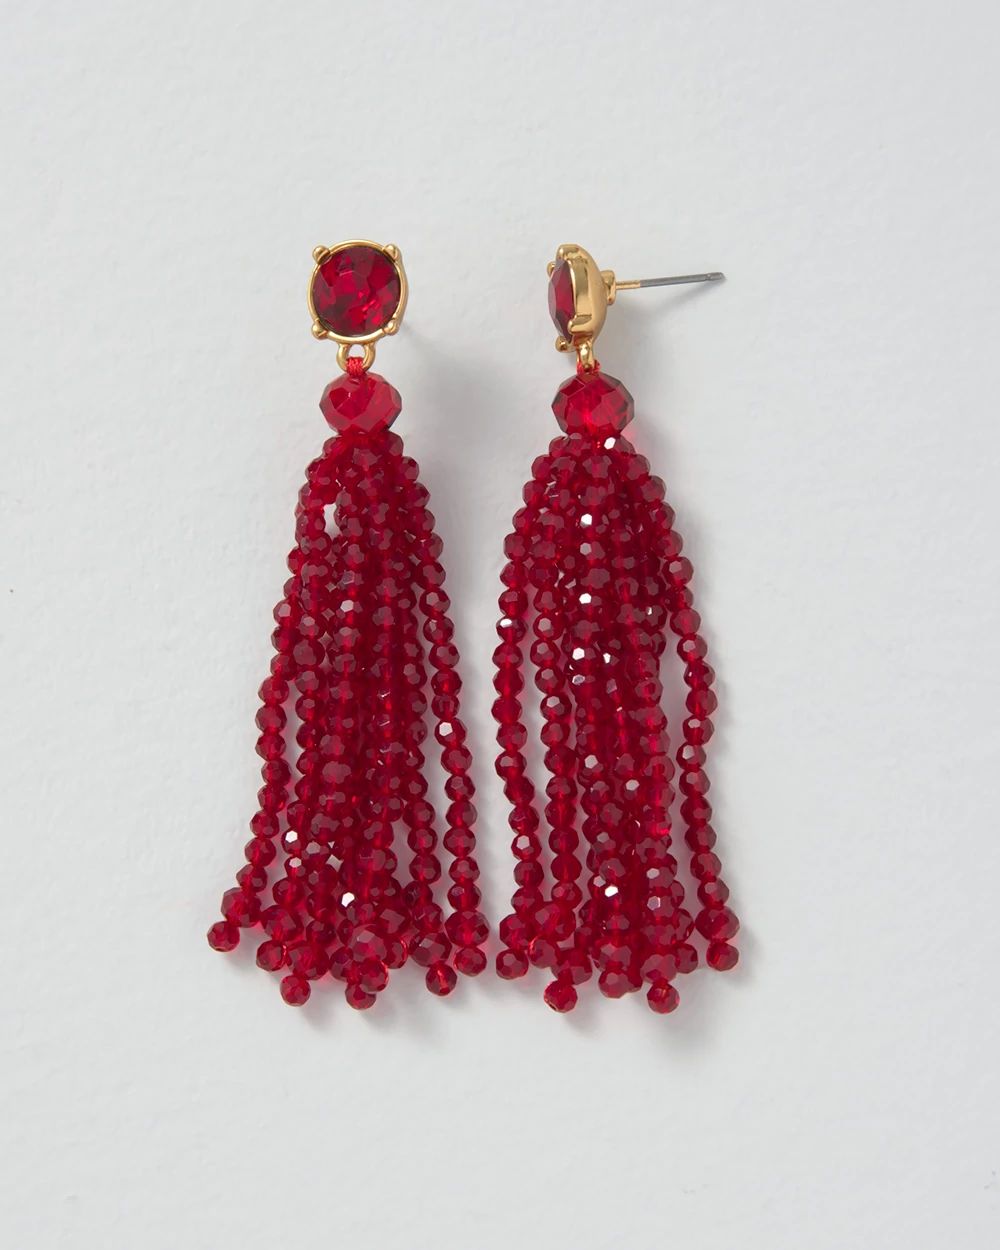 Red Beaded Tassel Earrings click to view larger image.